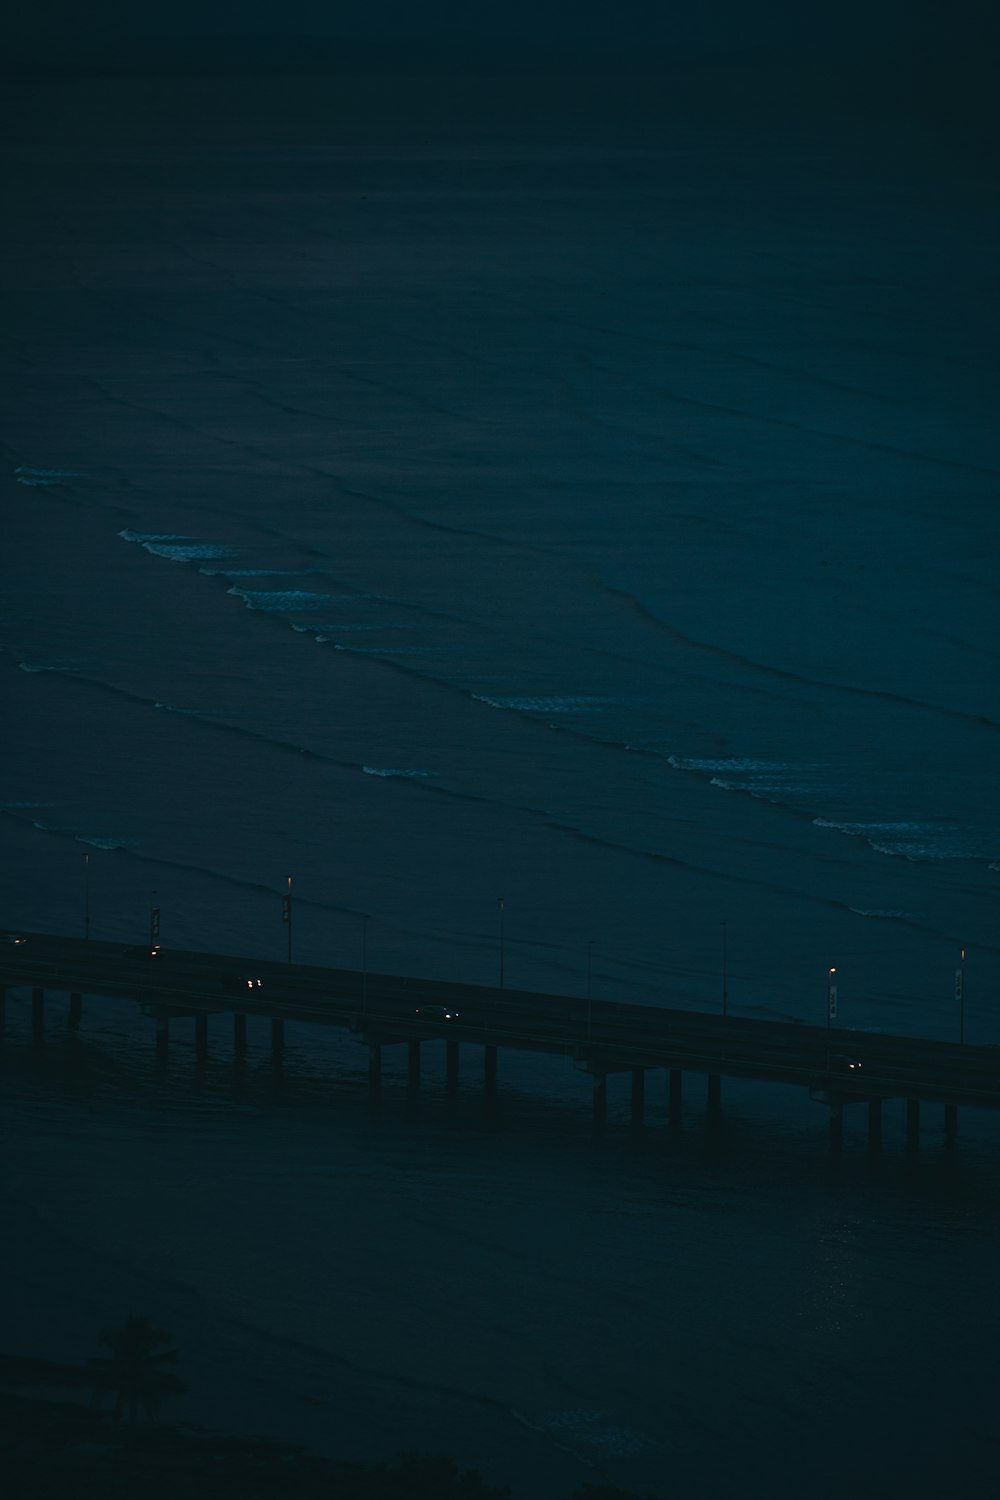 black wooden dock on blue body of water during night time